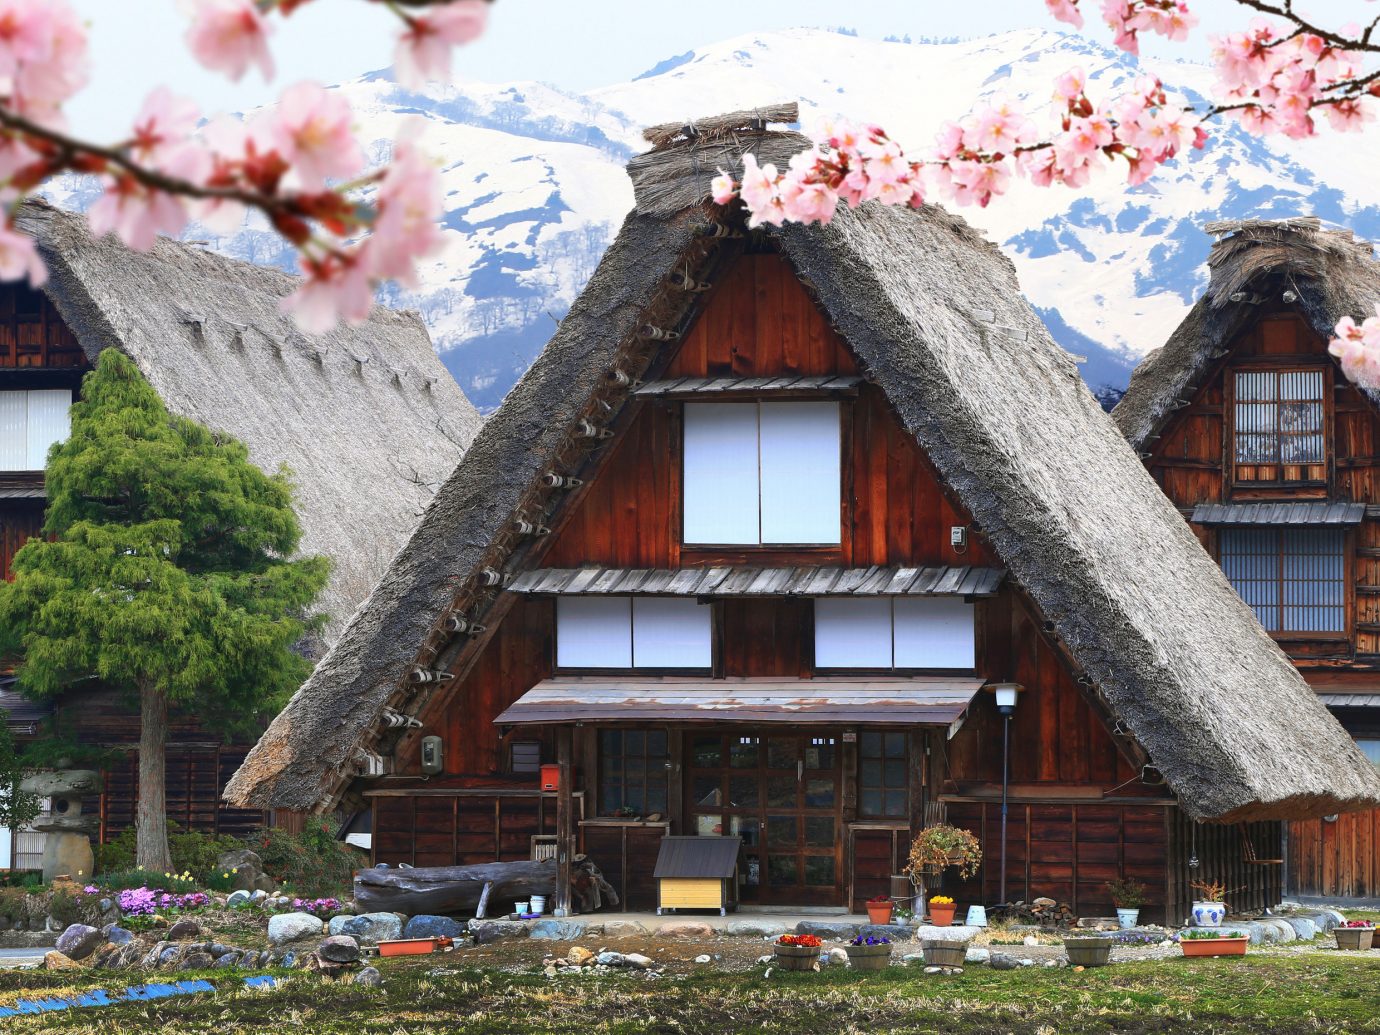 Trip Ideas flower plant house home tree building spring cherry blossom facade cottage roof